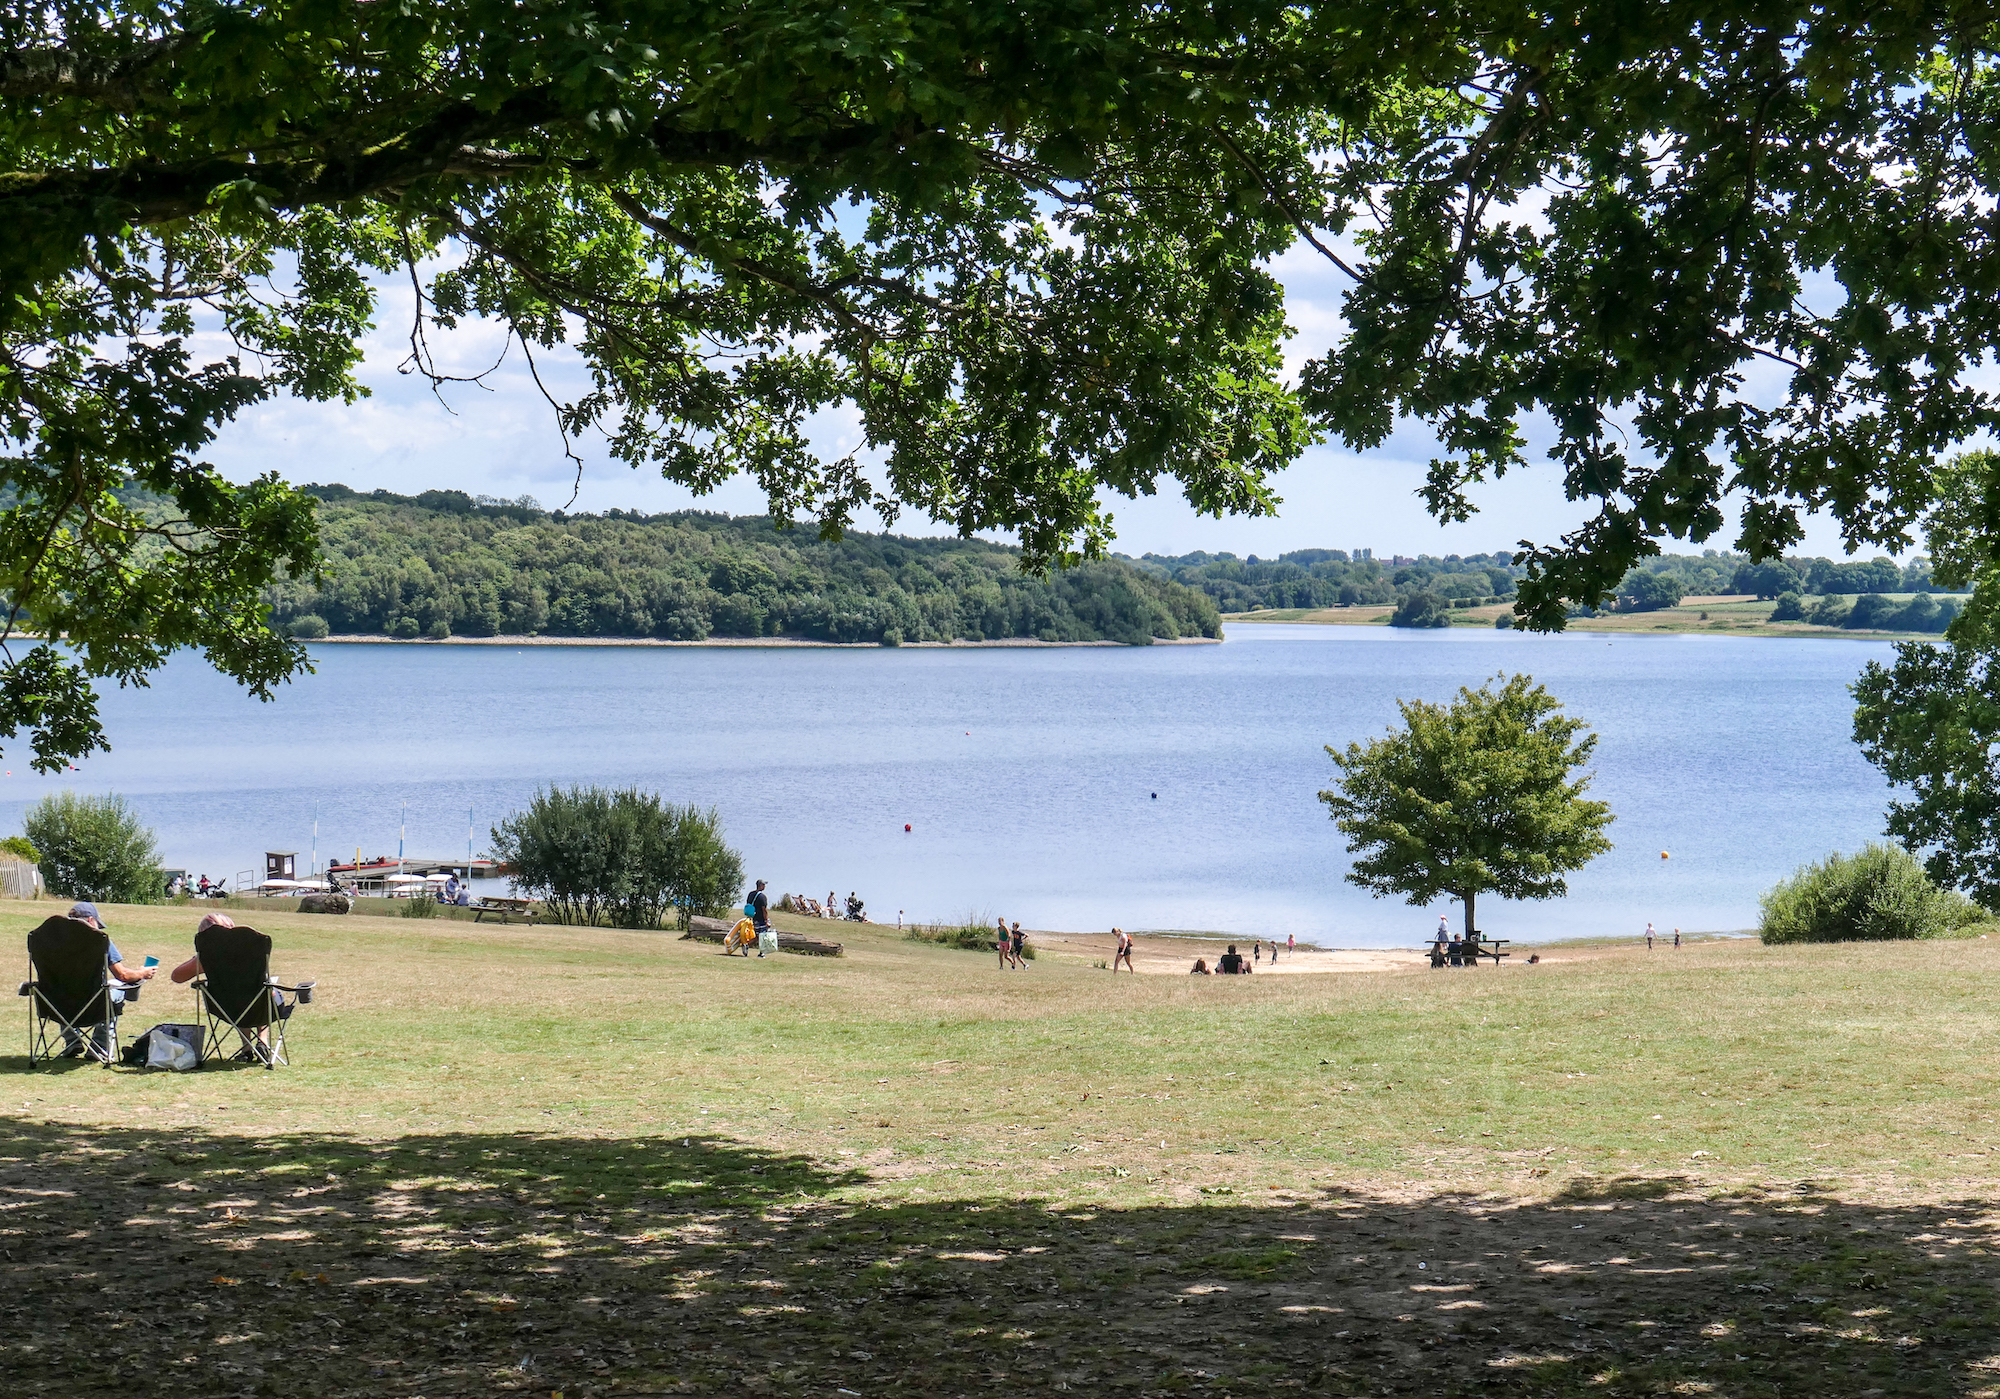 View of reservoir at Bewl Water, near Lamberhurst, on the boundary of East Sussex and Kent.